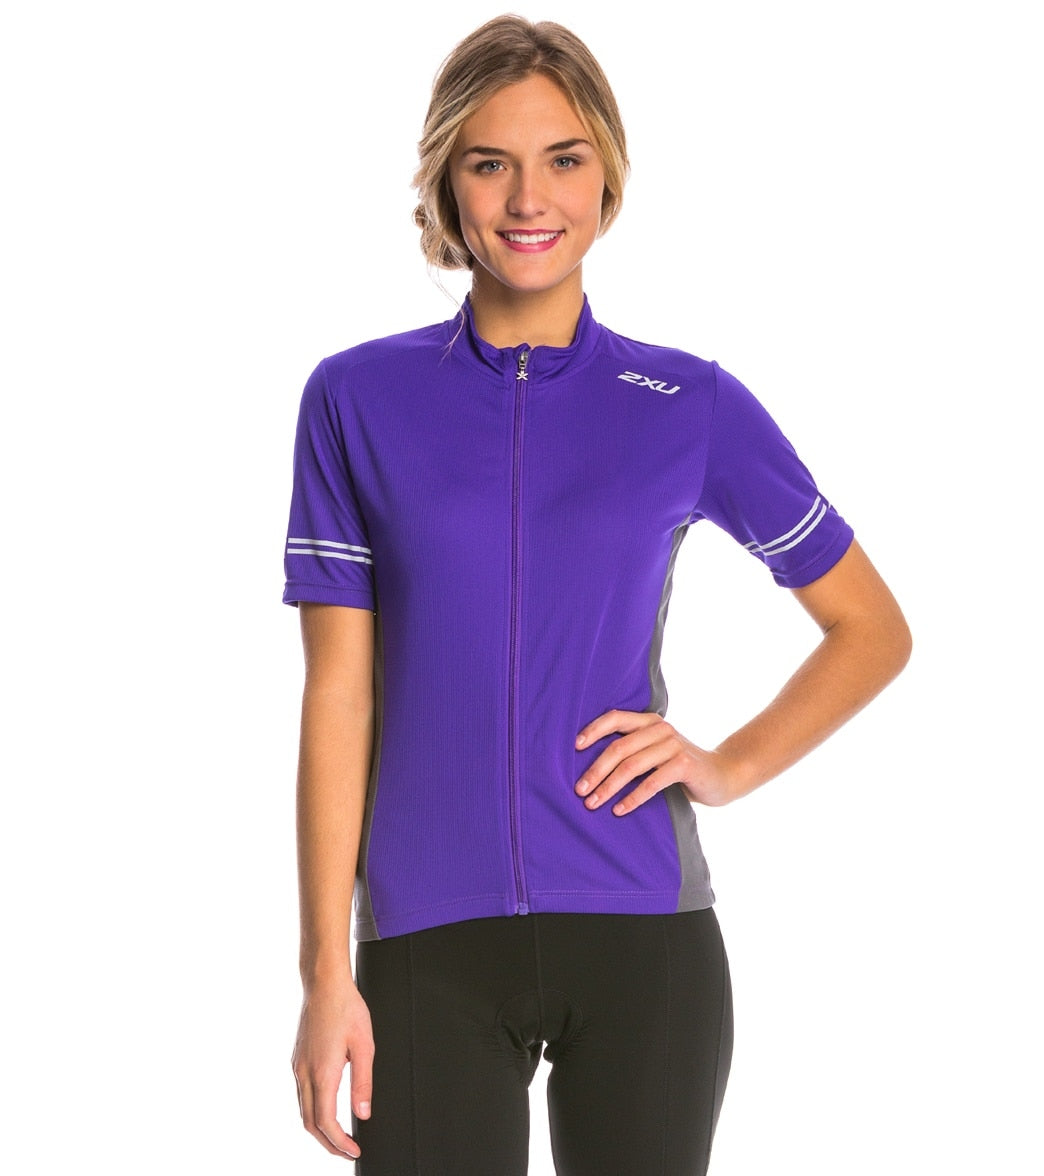 2XU Women's Perform Cycle Jersey at SwimOutlet.com